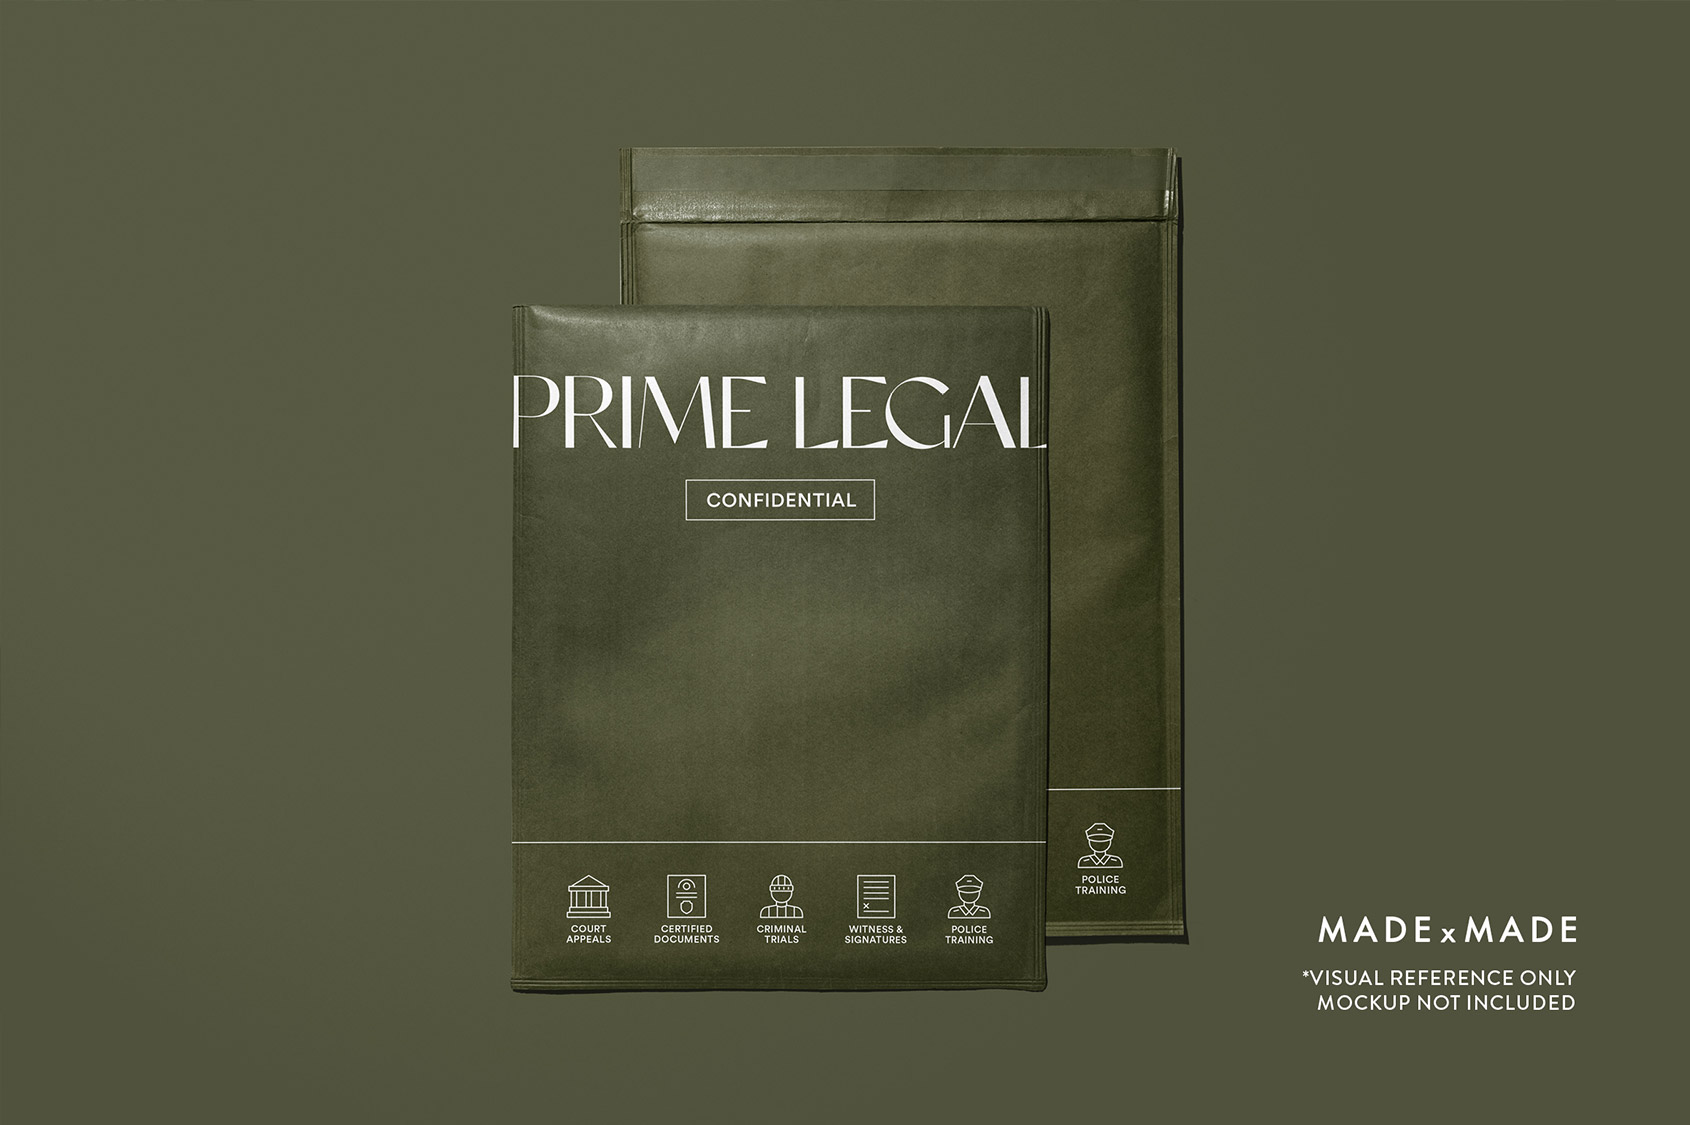 made x made icons legal – Mockup of A4 postage envelopes with Prime Legal branding and icon examples of court, criminal, paperwork and police